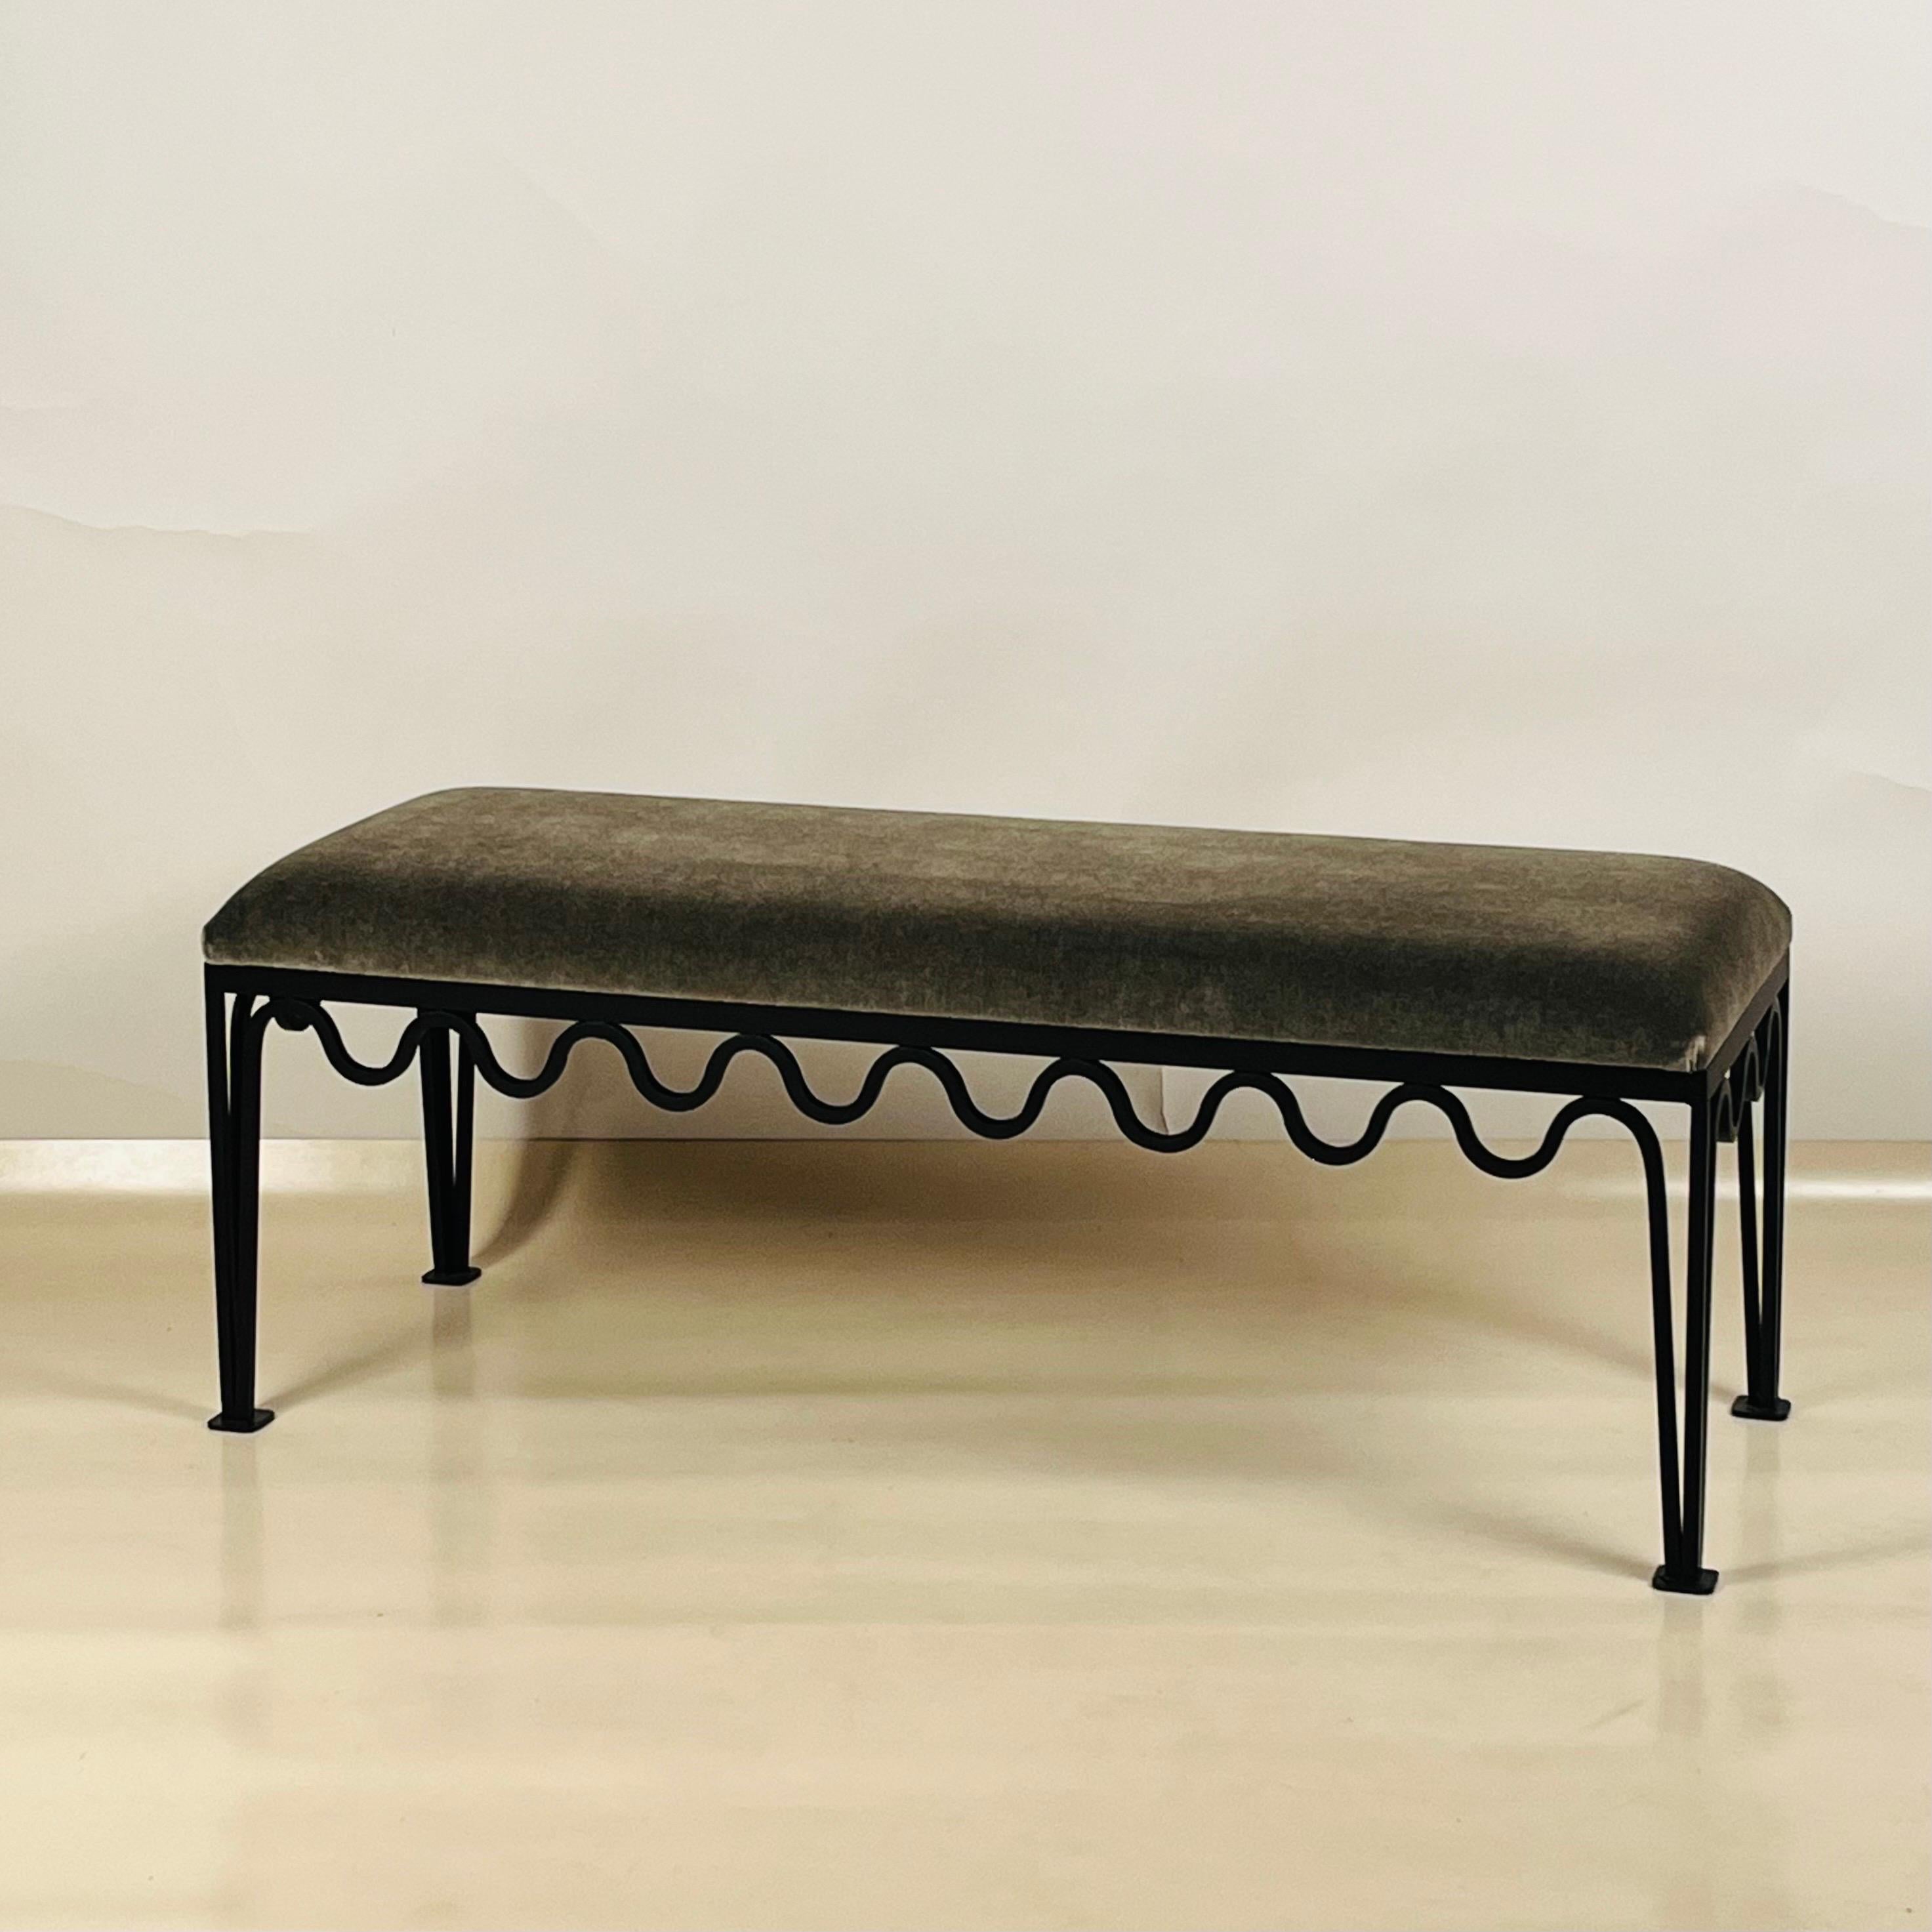 The Méandre™ bench by DESIGN FRÈRES in mohair velvet or COM.

Upholstered firm in mohair velvet (specify color) or provide COM (1 yard). Mohair velvet is extremely durable and resists dirt and crushing. If a piece is going to be heavily used, mohair